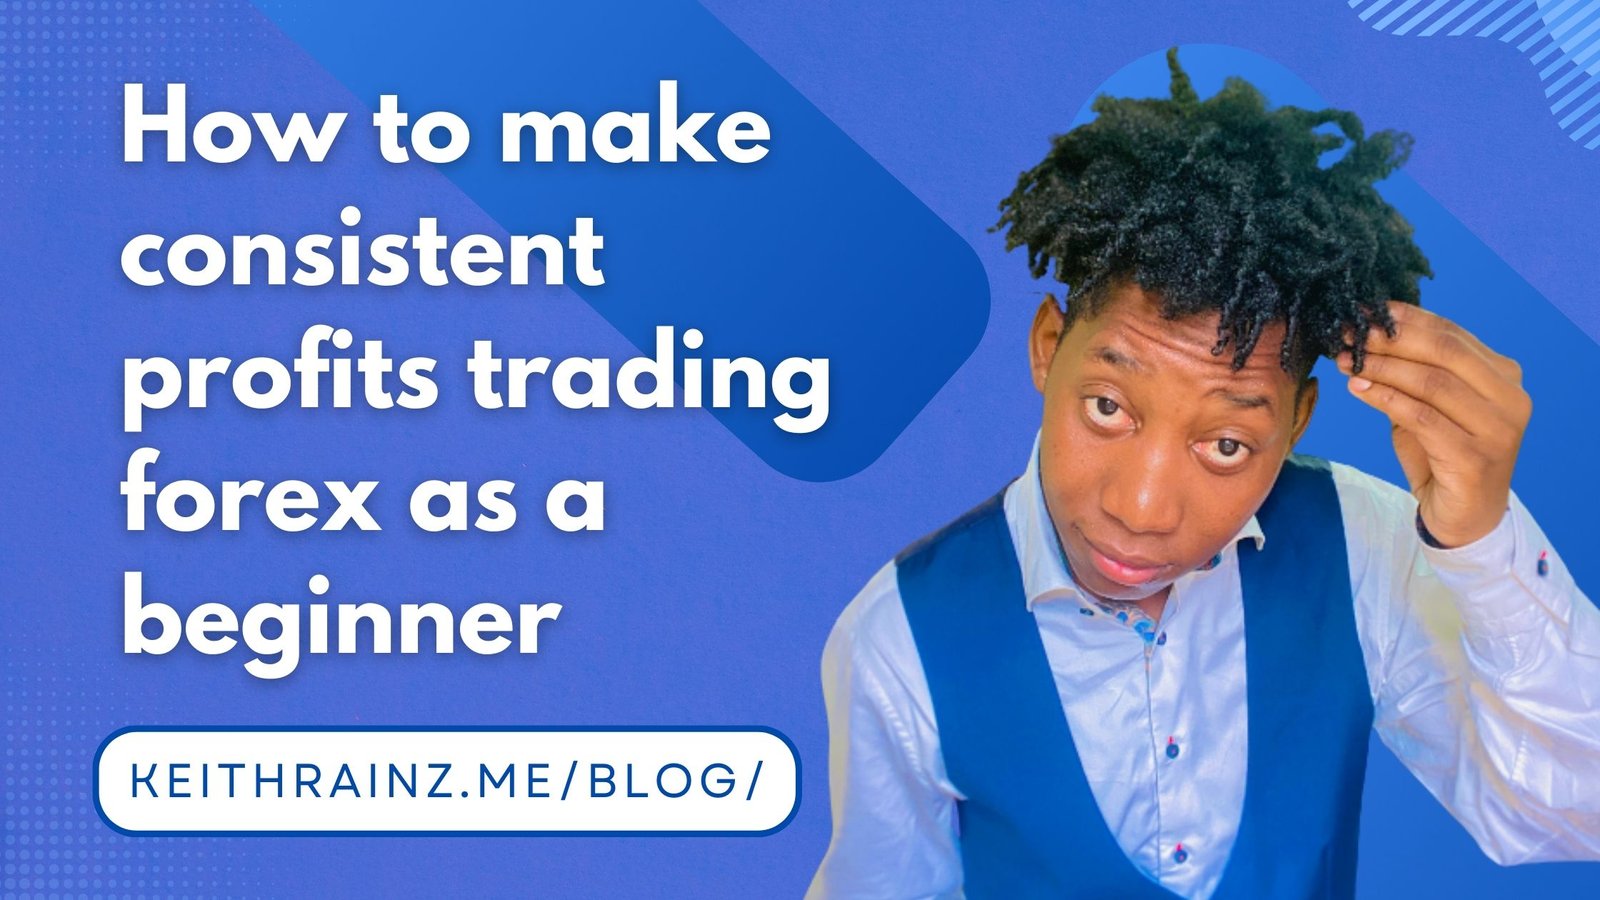 How to make consistent profits trading forex as a beginner